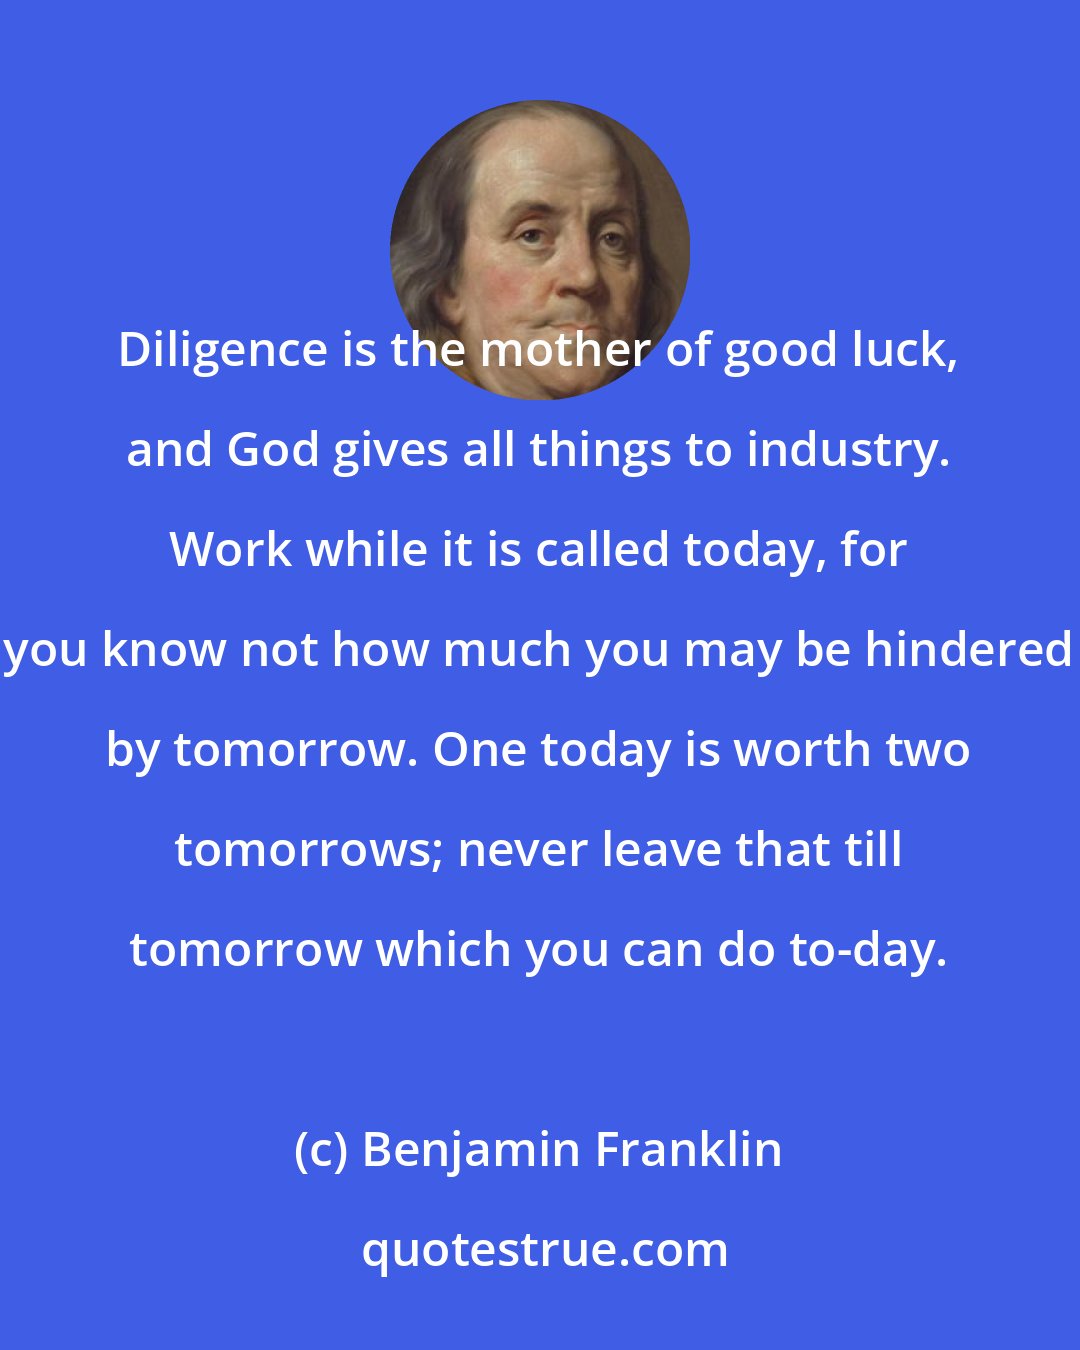 Benjamin Franklin: Diligence is the mother of good luck, and God gives all things to industry. Work while it is called today, for you know not how much you may be hindered by tomorrow. One today is worth two tomorrows; never leave that till tomorrow which you can do to-day.